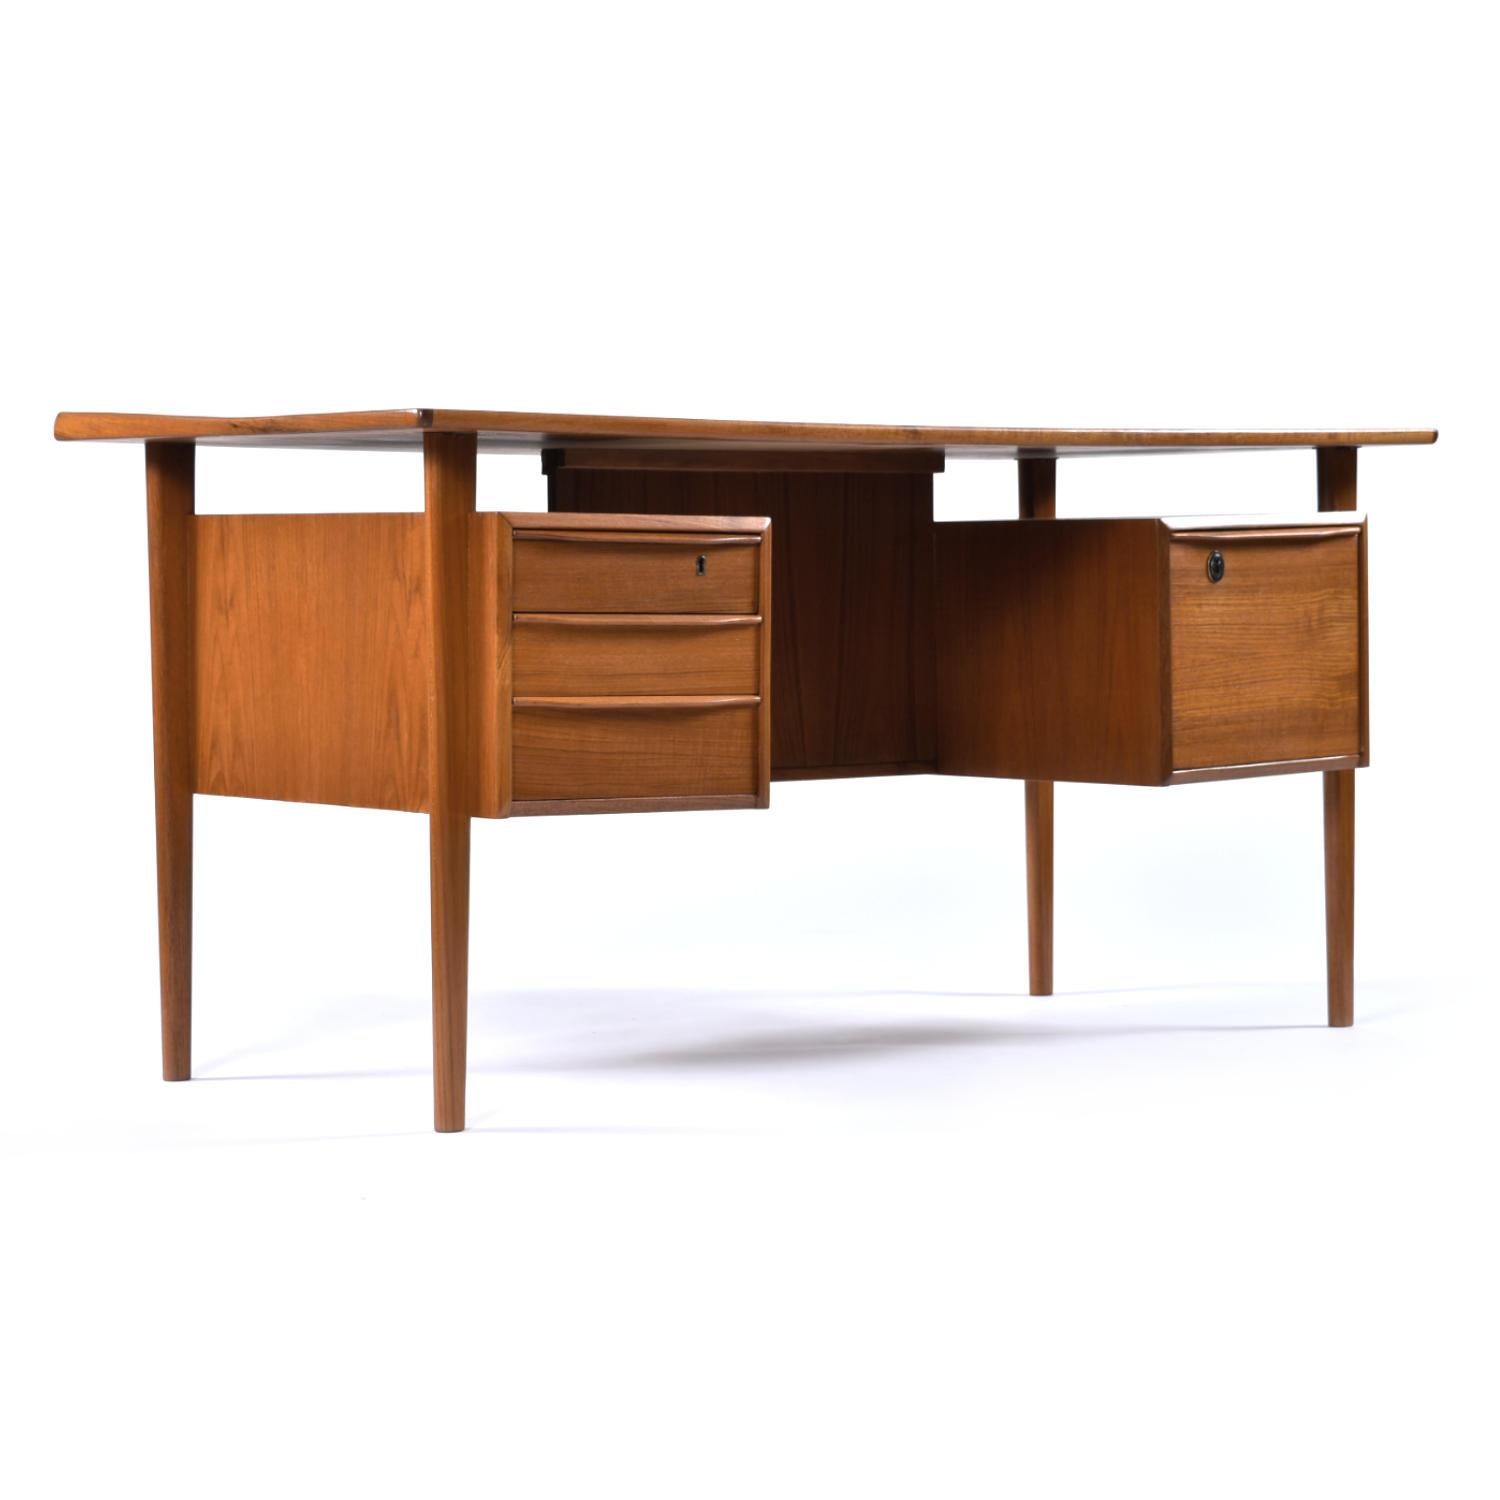 Mid-Century Modern Danish teak desk designed by Peter Lovig for Hedensted. This Scandinavian marvel has been fully restored. The desk top, cabinet, legs, have all been refinished. The desk even boasts new locking mechanisms on the drawers (key